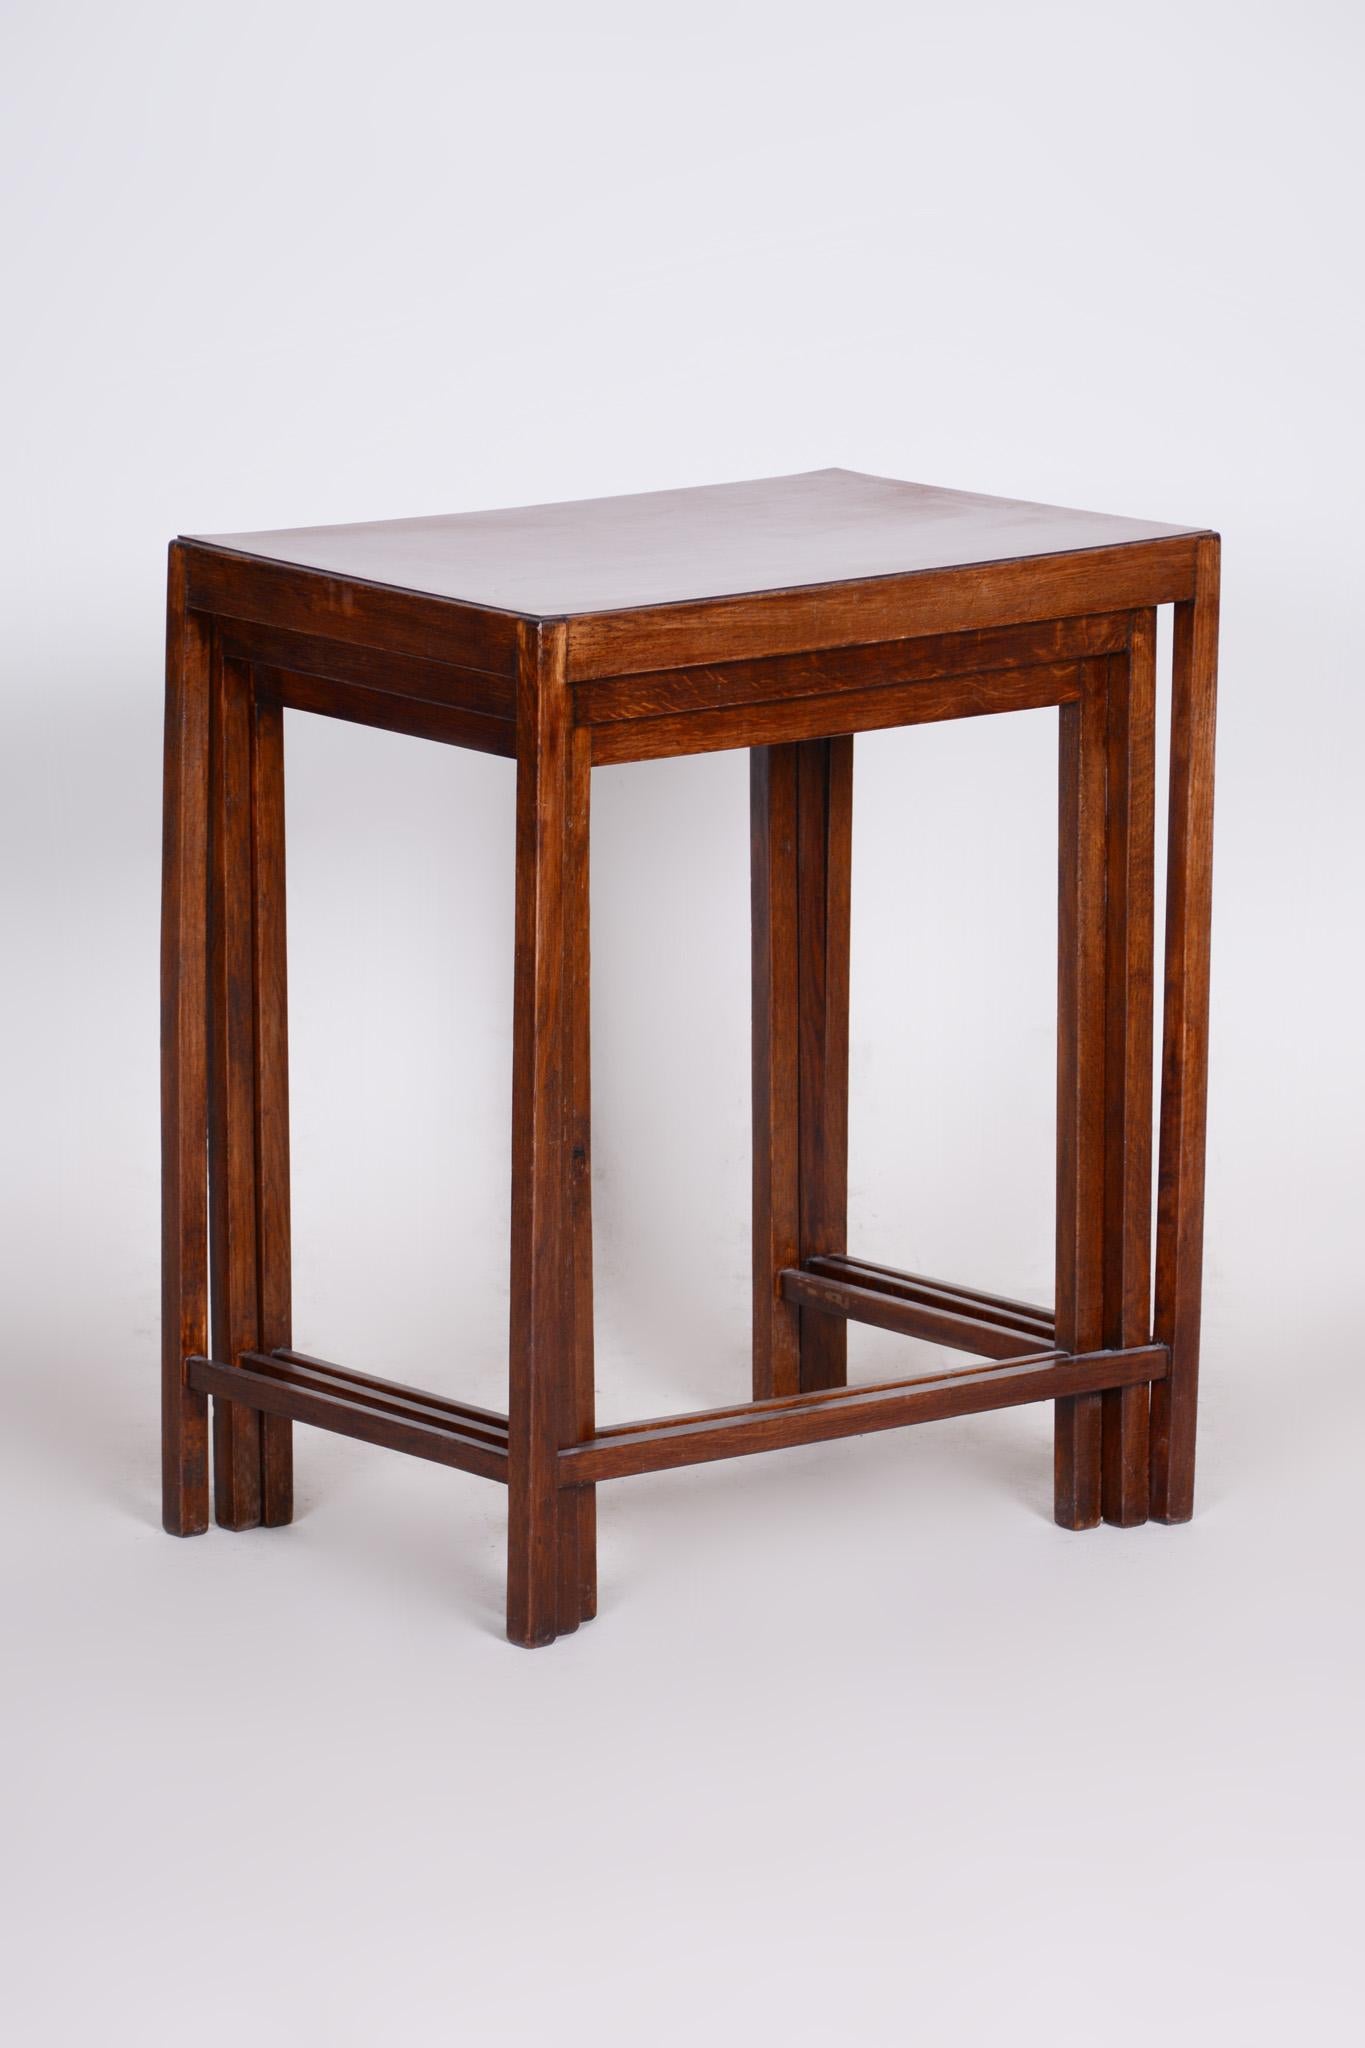 Art Deco Original Condition Brown Nest Tables Made in the 1930s by Halabala, Czech